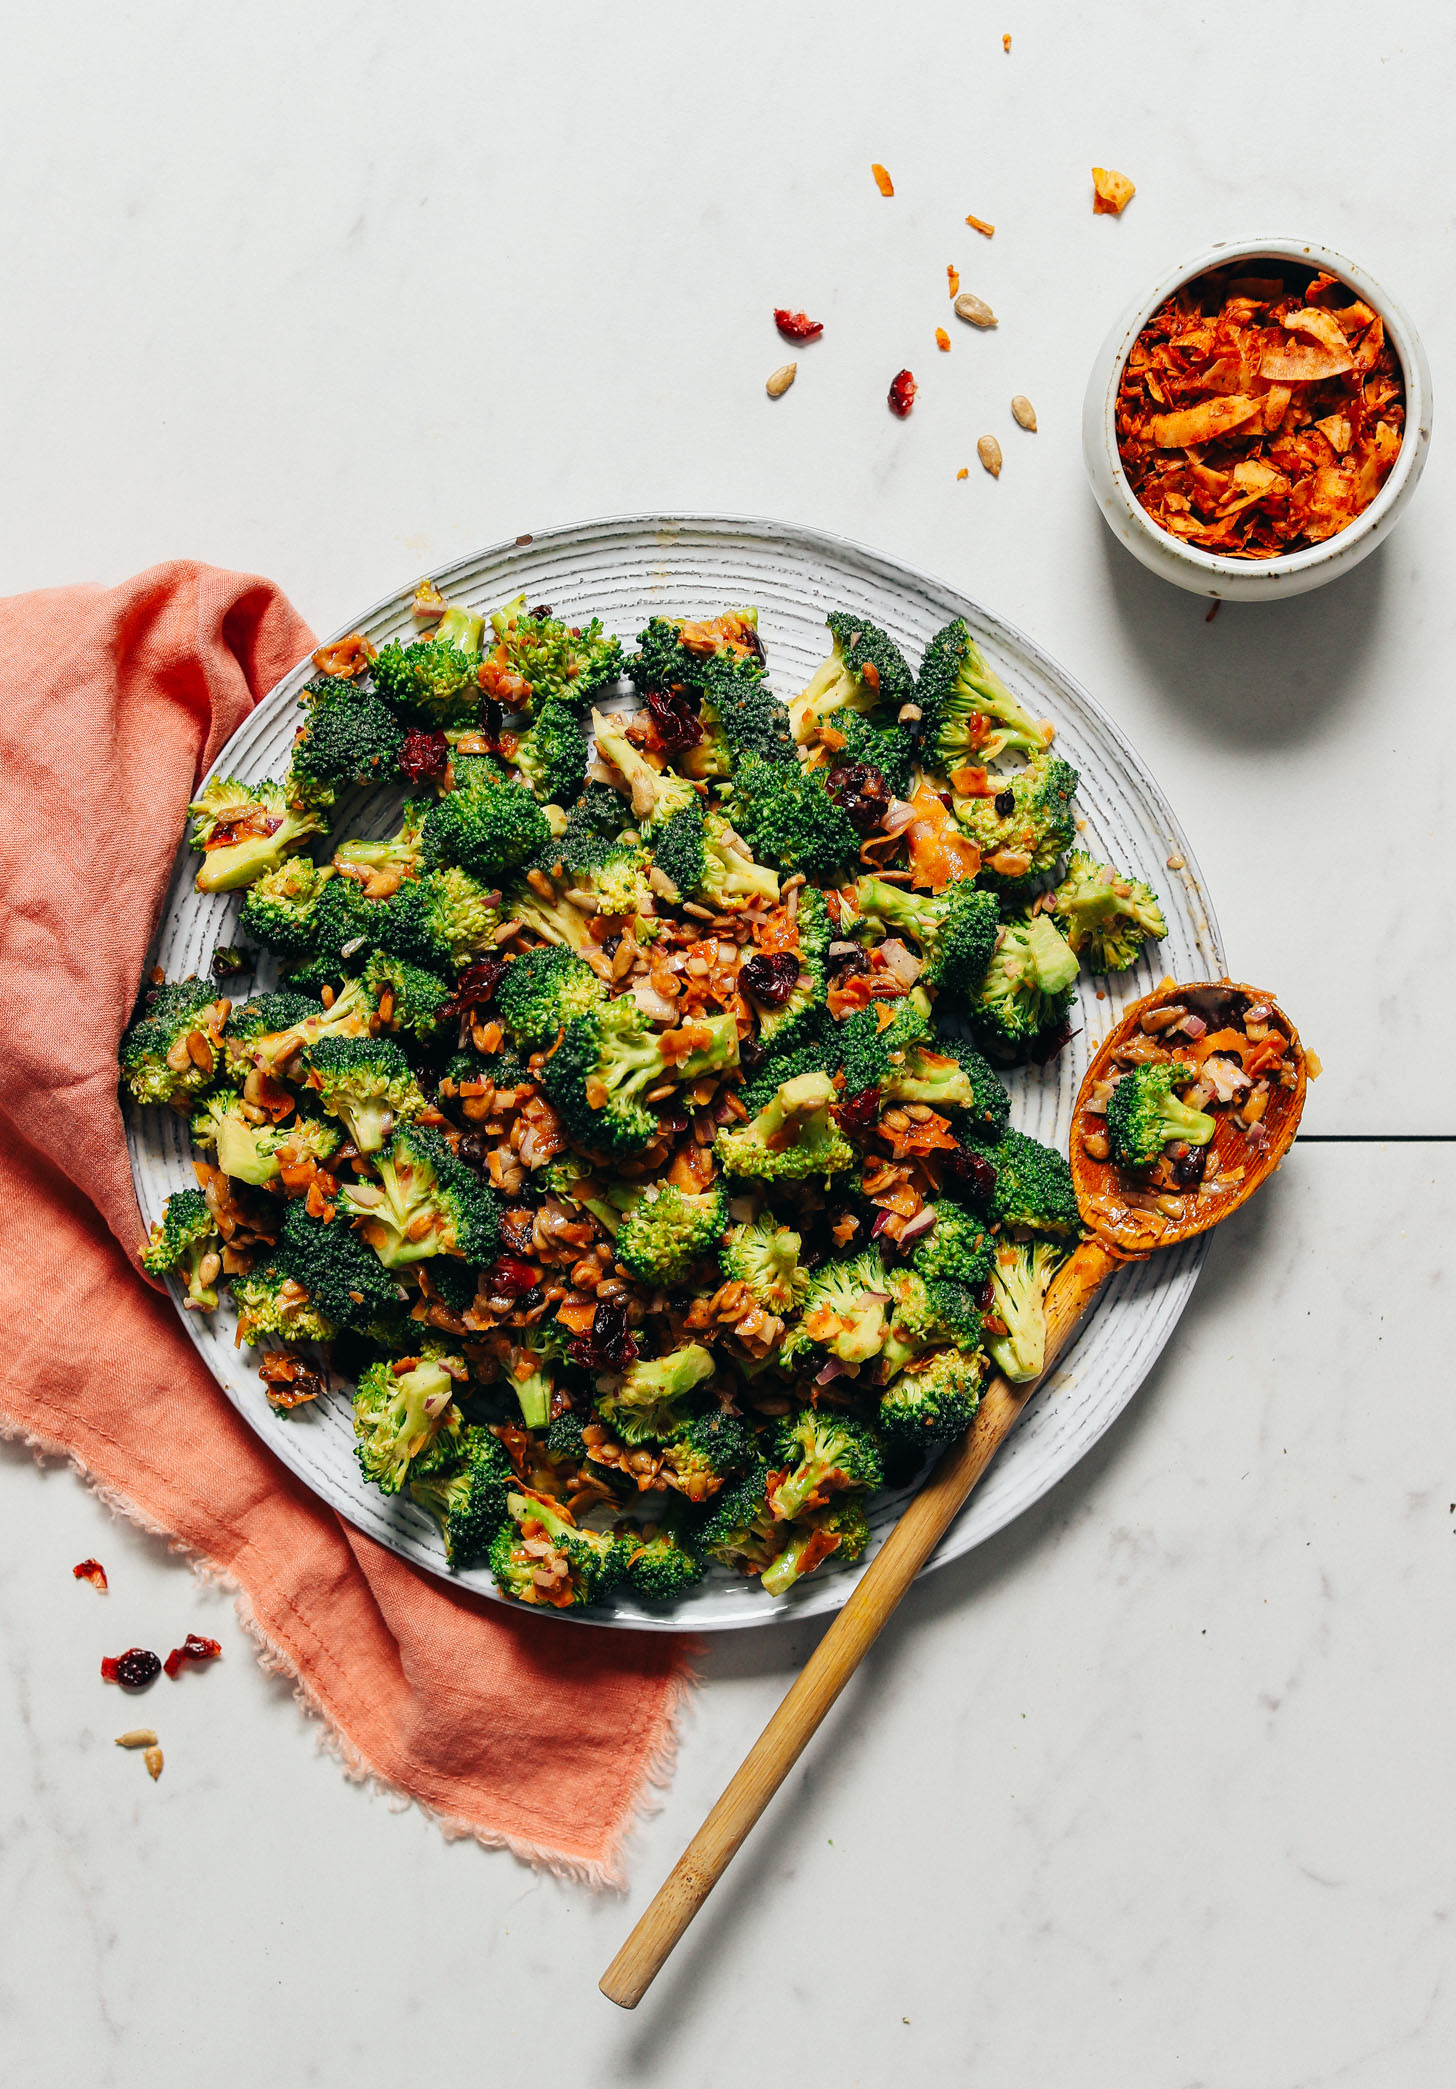 Wooden spoon resting on a plate of Creamy Vegan Broccoli Salad made without mayo